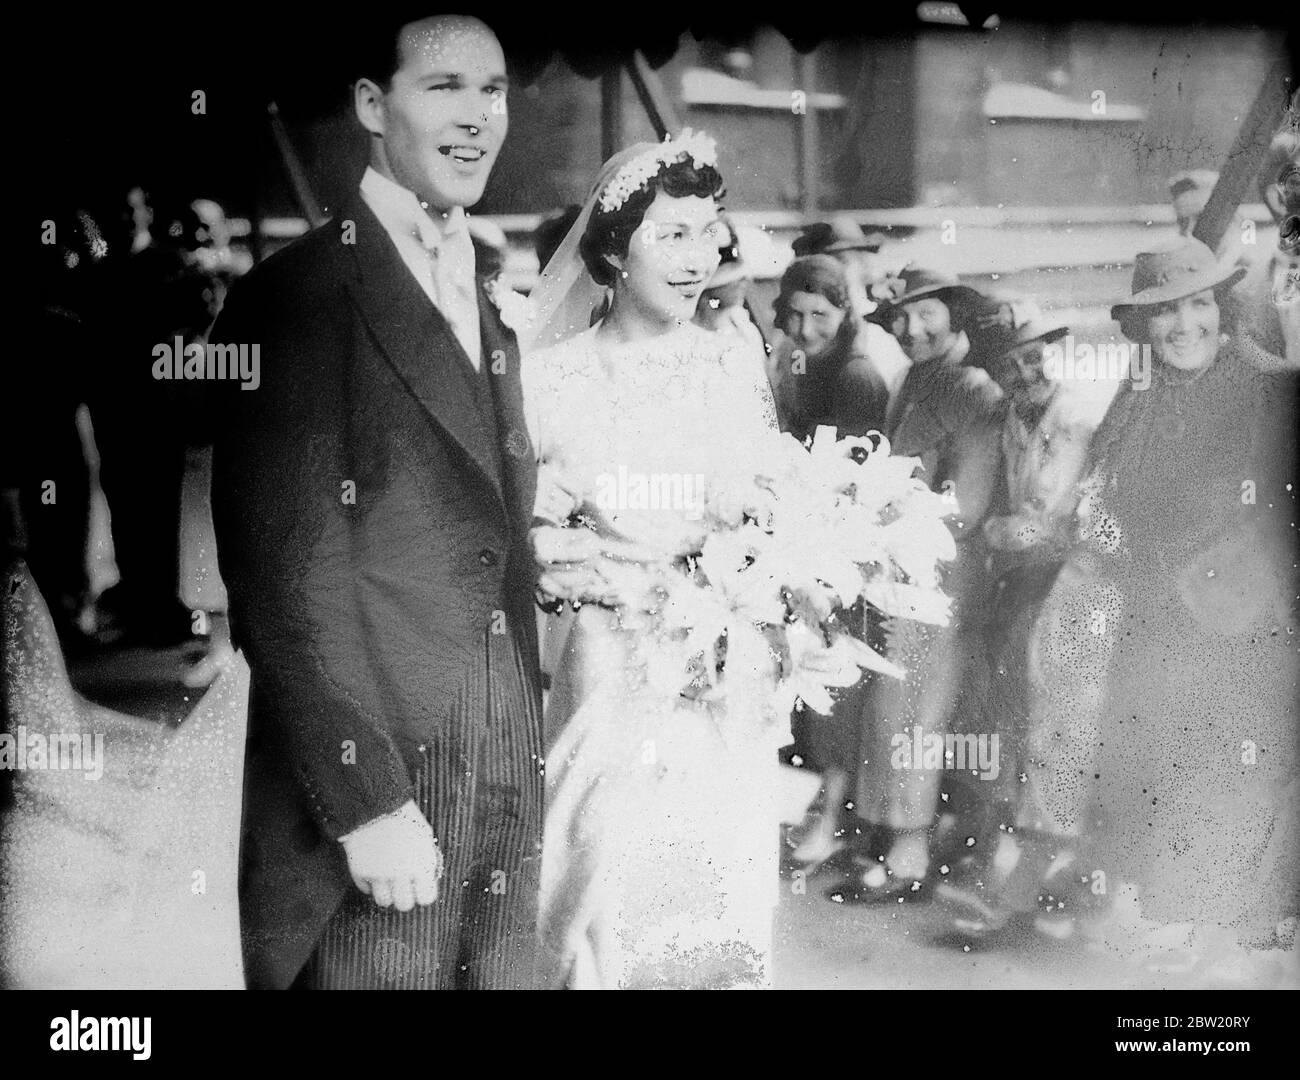 The bride and groom leaving the cathedral after the ceremony. Miss Elizabeth Coates, daughter of Sir Clive and Lady Celia Coates, was married to Mr William Harris at Southwark Cathedral. The Archbishop of York and the master of the temple assisted at the ceremony. 15 July 1937. Stock Photo